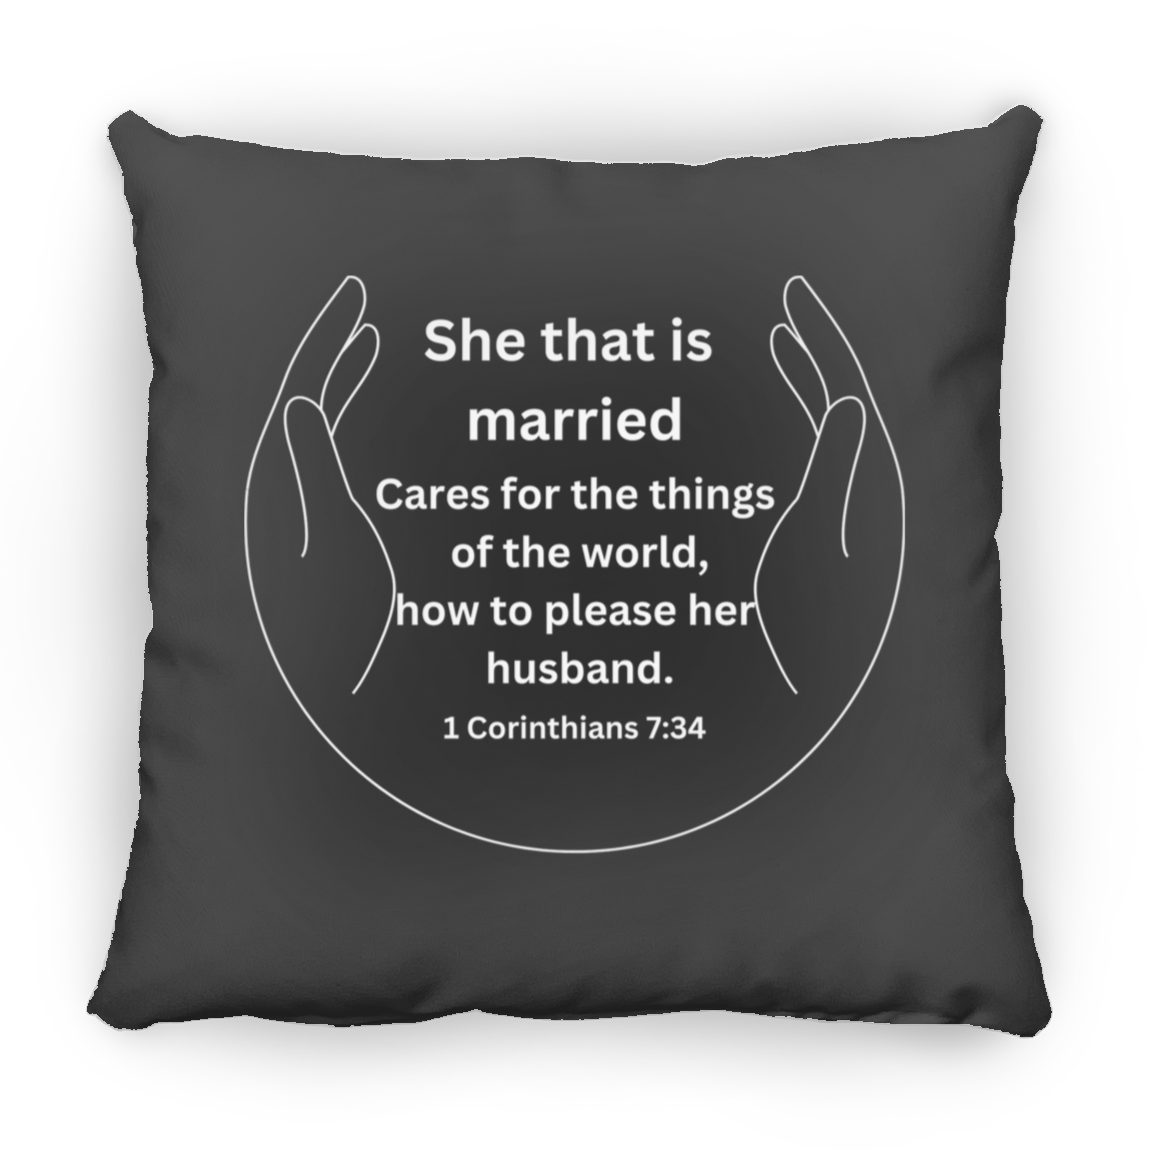 She that is married Pillows